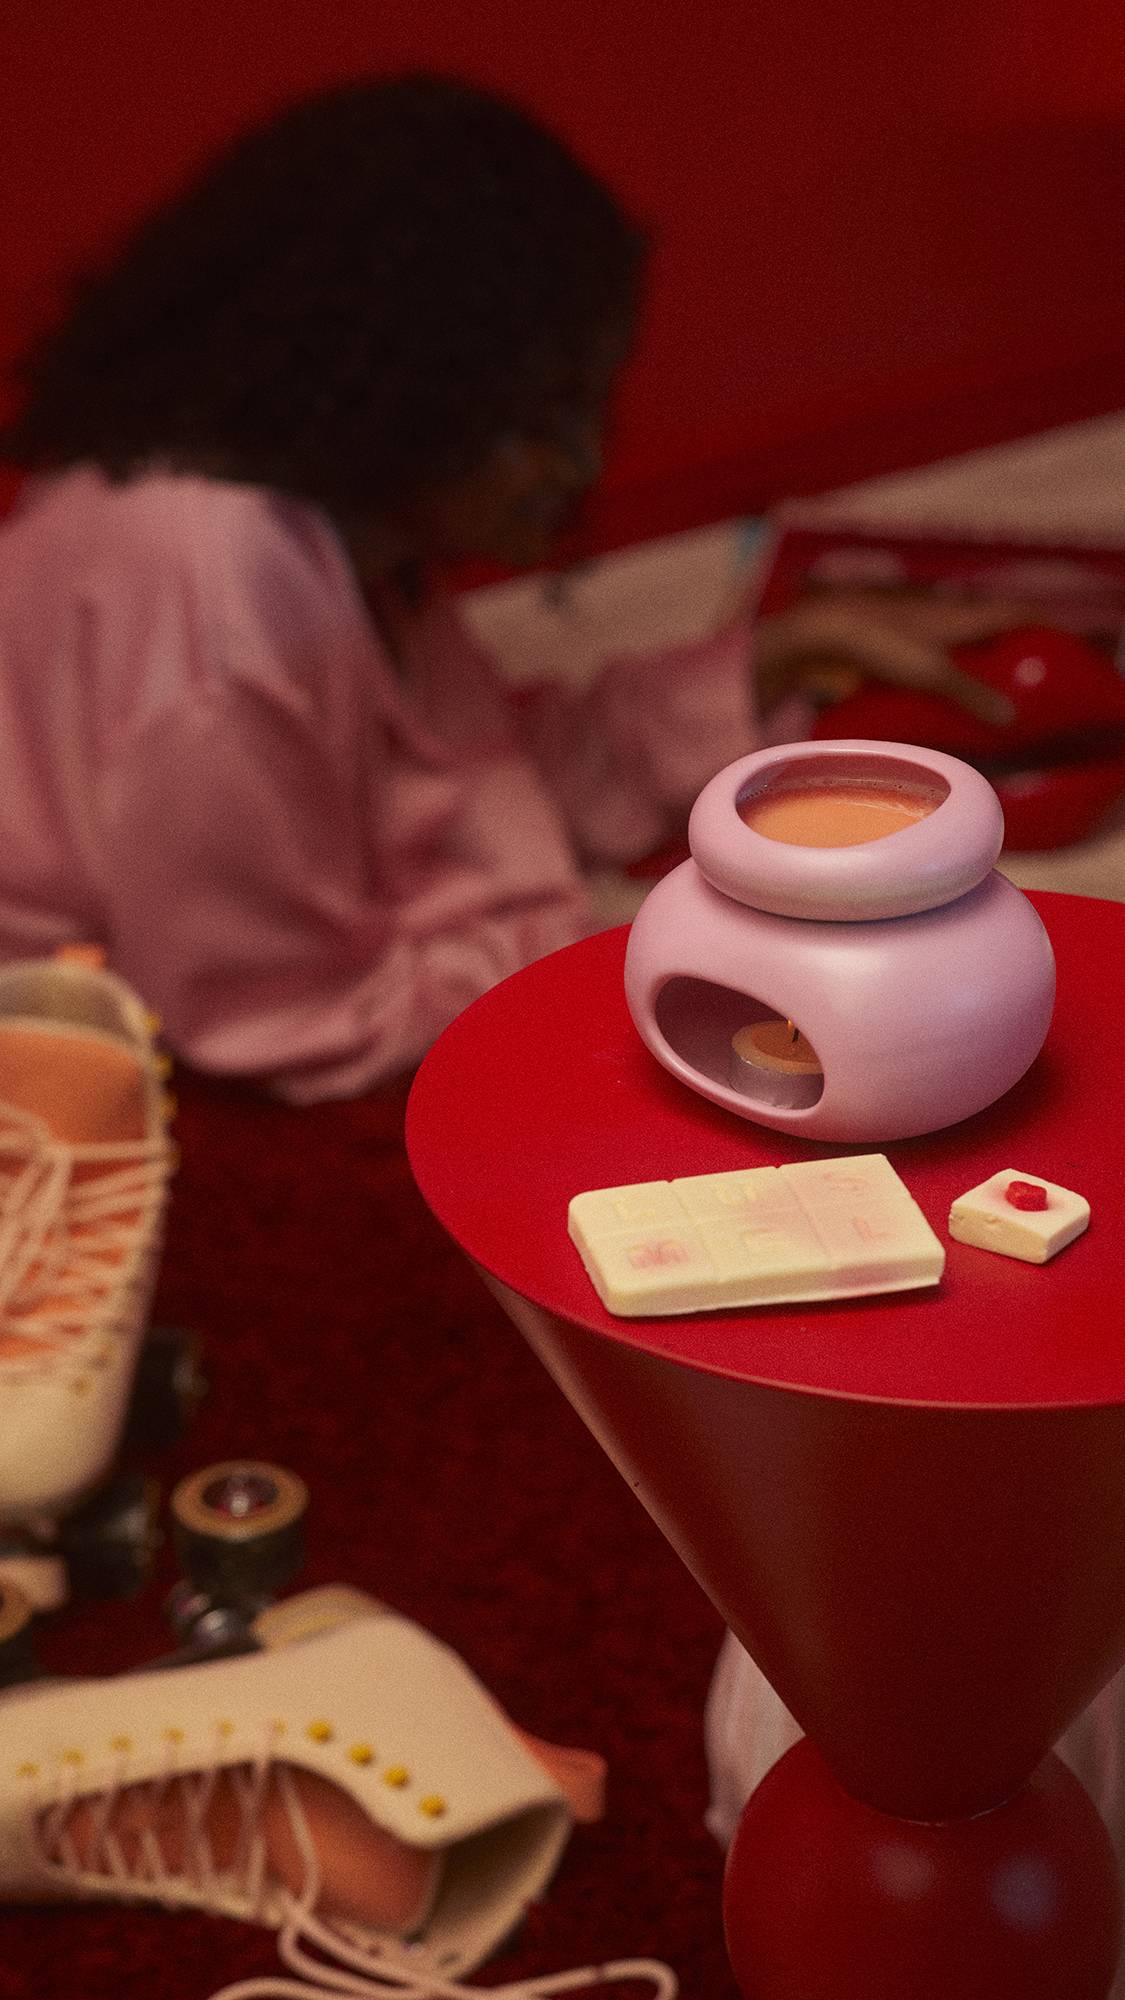 The Queen of Hearts product is melting in a pink wax burner on a red table. There are some roller skates just out of focus to the side. 